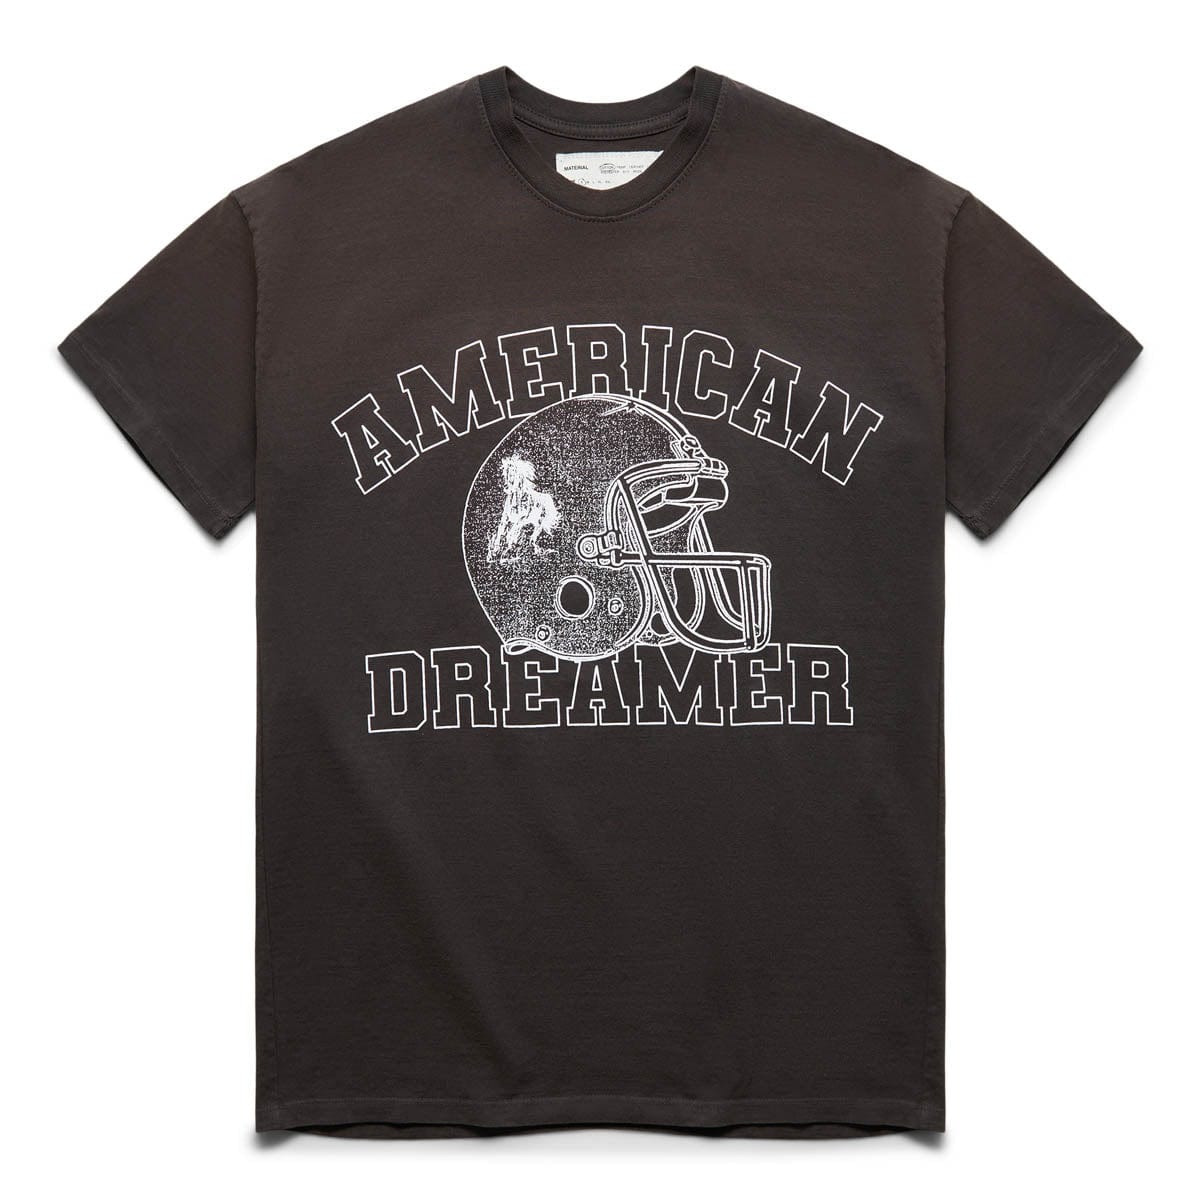 One Of These Days T-Shirts AMERICAN DREAMER TEE